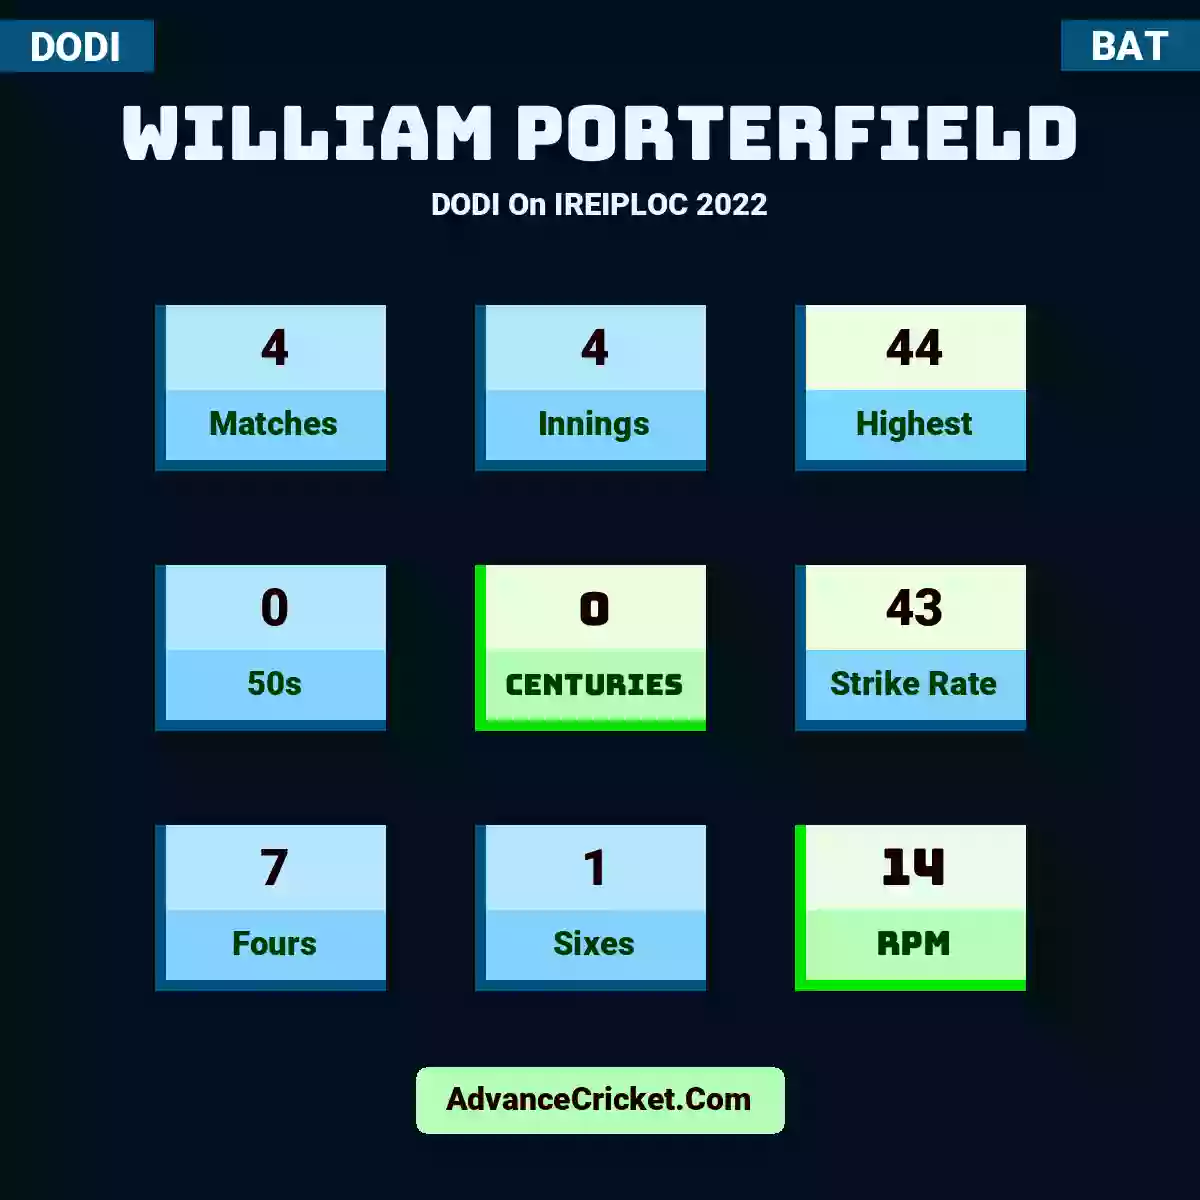 William Porterfield DODI  On IREIPLOC 2022, William Porterfield played 4 matches, scored 44 runs as highest, 0 half-centuries, and 0 centuries, with a strike rate of 43. W.Porterfield hit 7 fours and 1 sixes, with an RPM of 14.